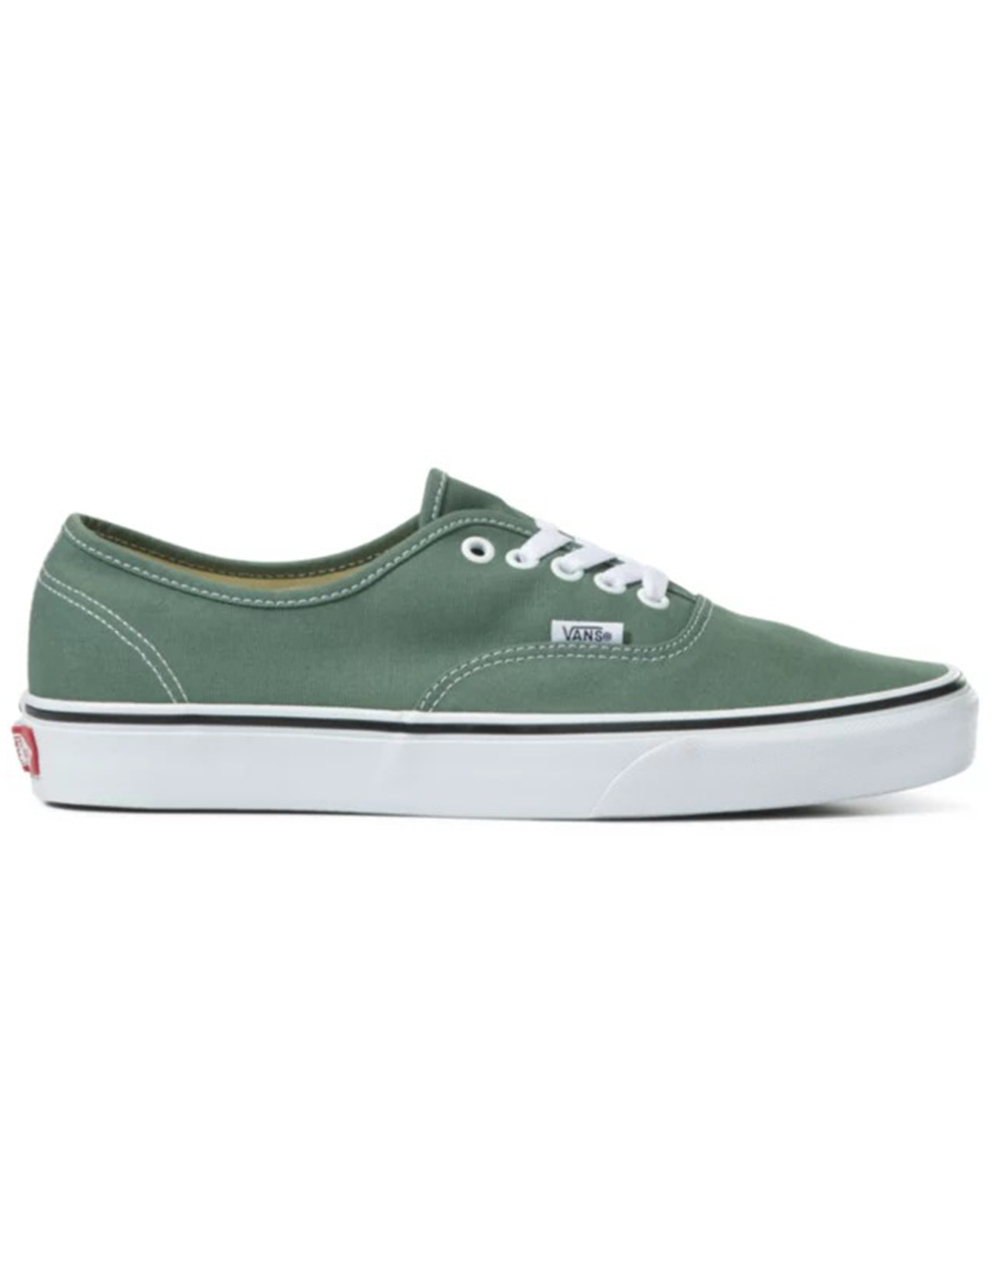 VANS Authentic Shoes - GREEN/WHITE | Tillys